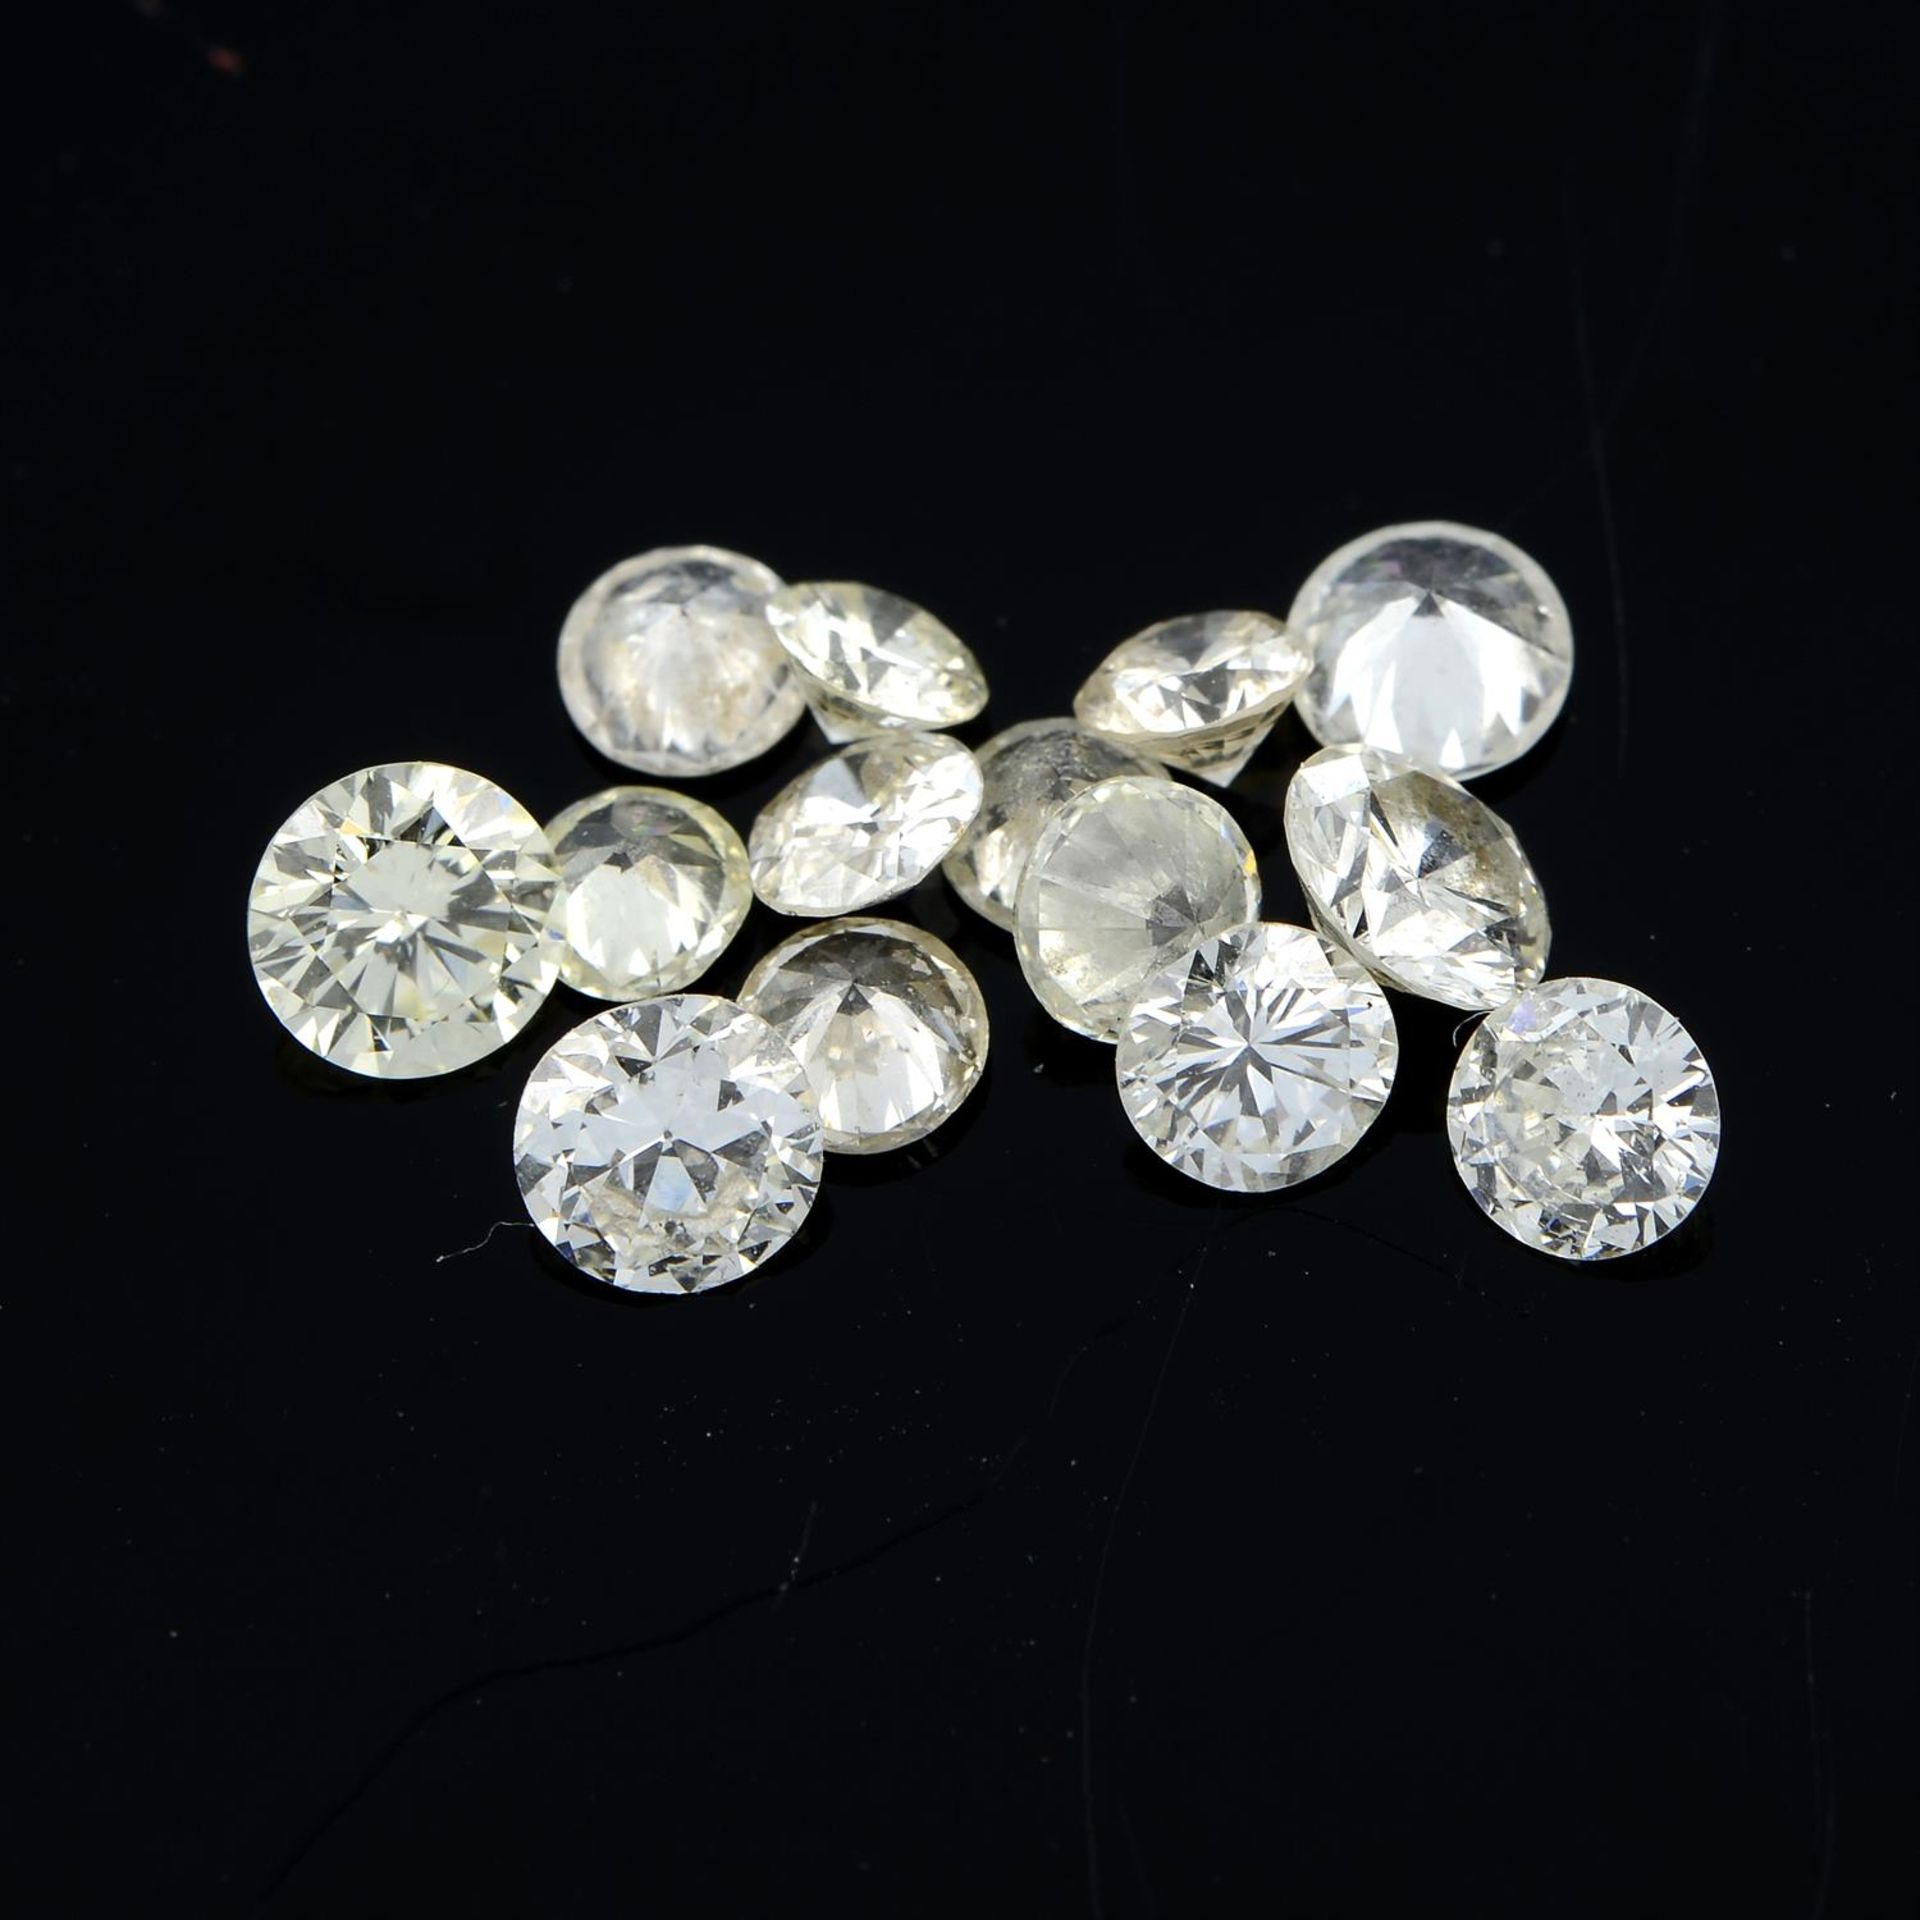 A selection of round brilliant-cut diamonds, total weight 2.35cts.